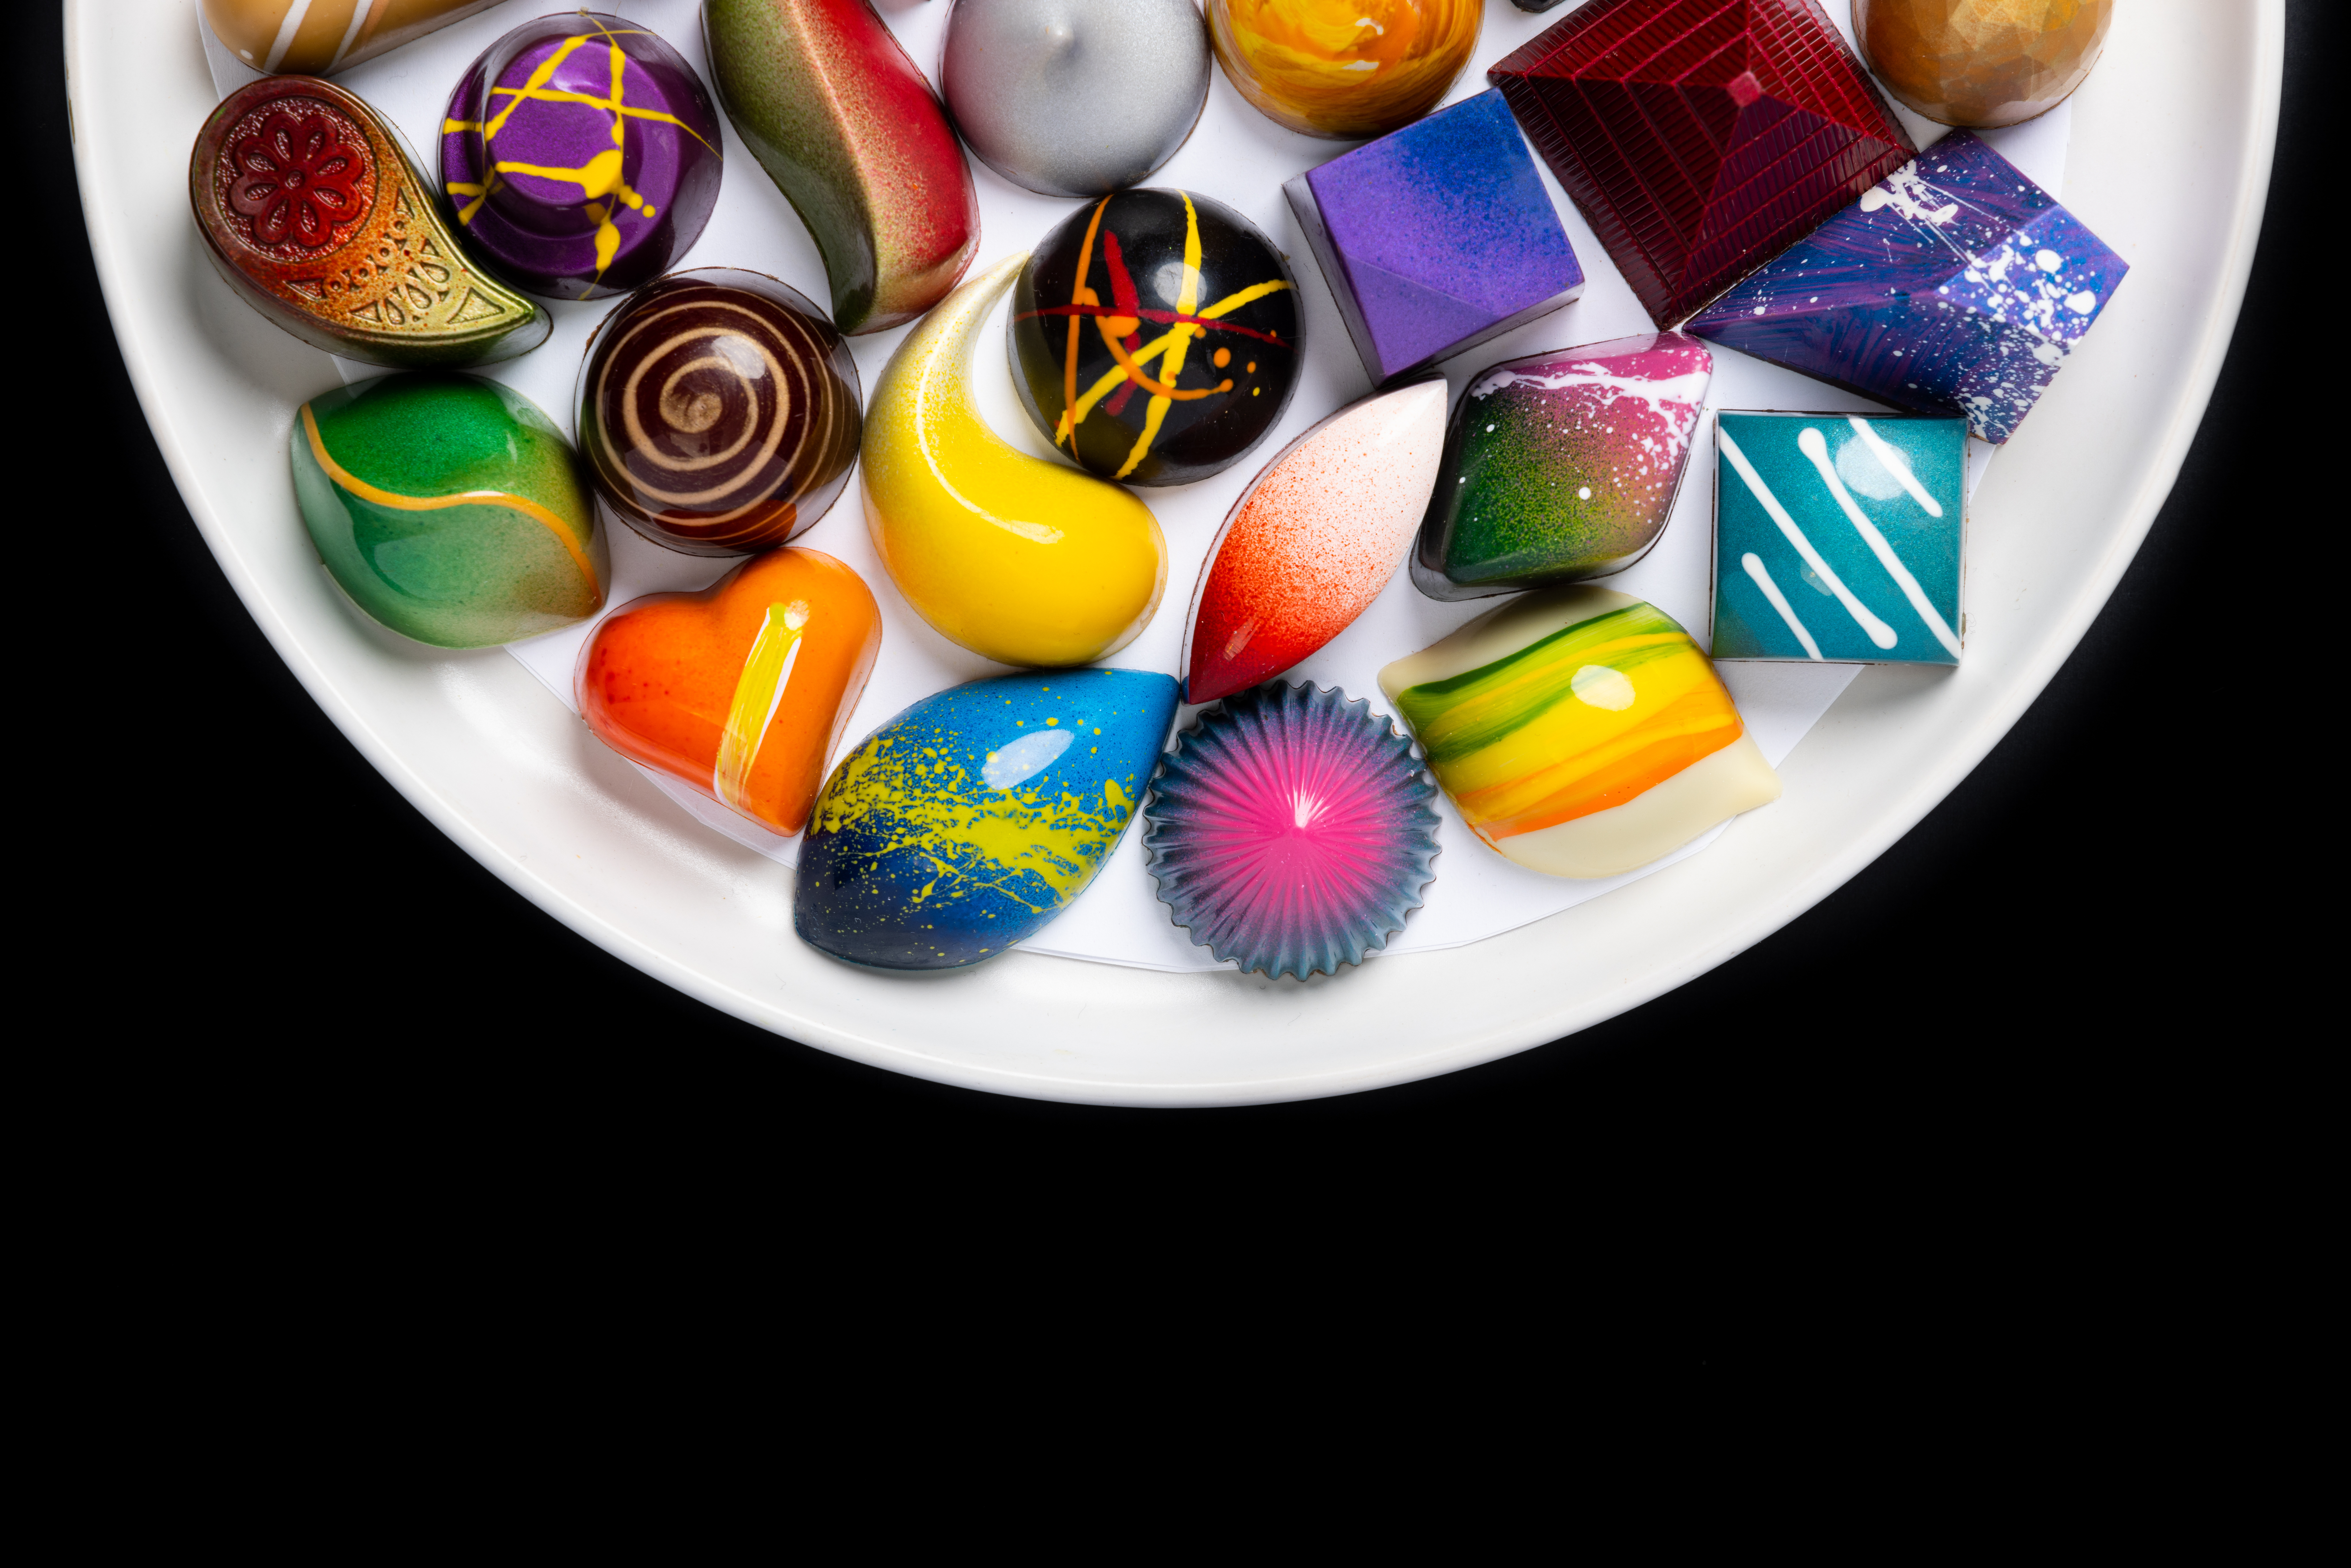 An image of painted chocolates